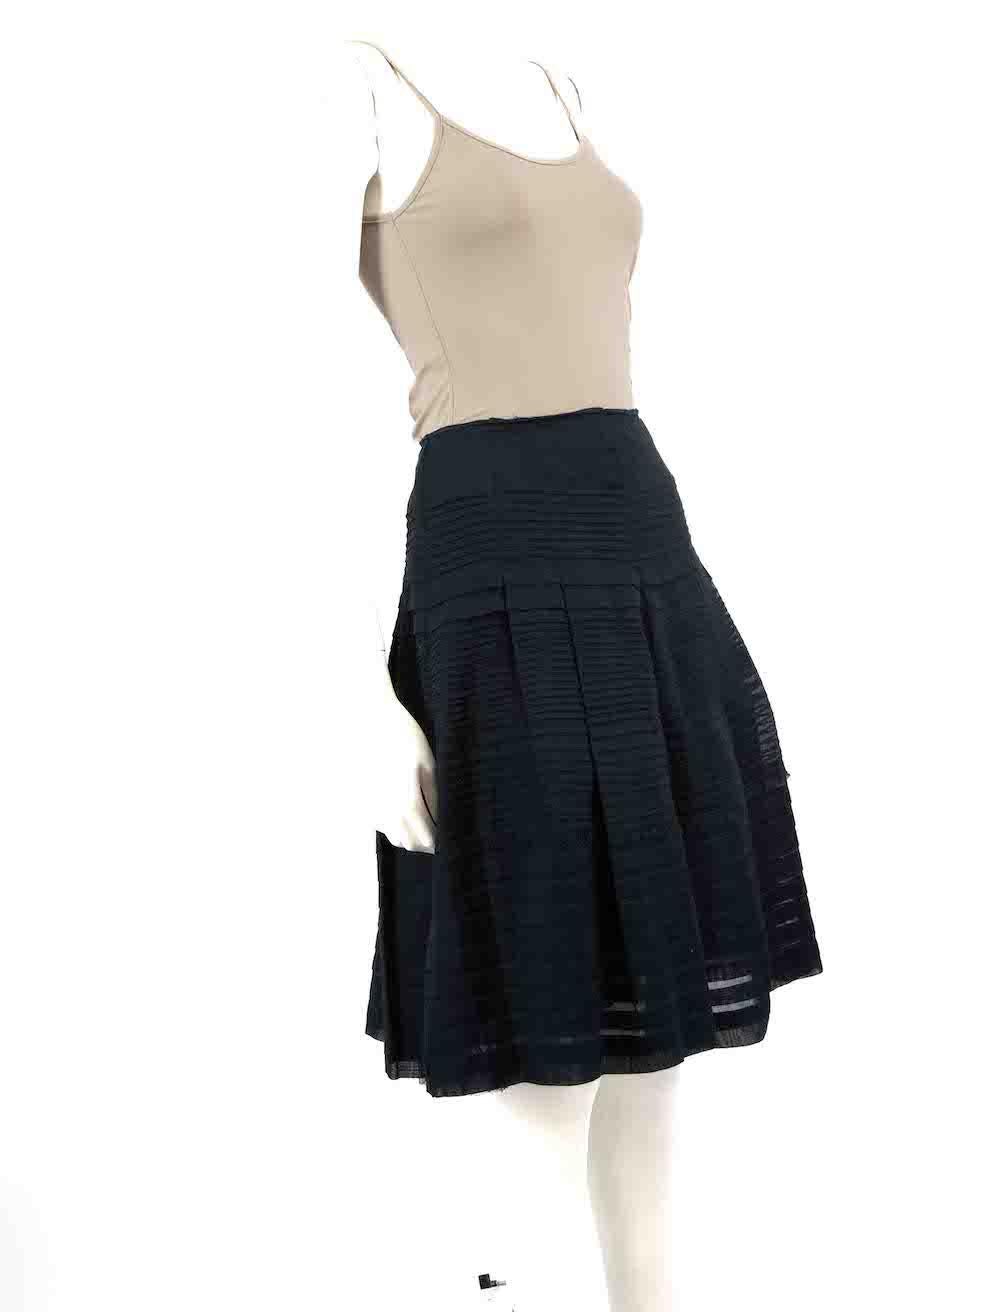 CONDITION is Very good. Hardly any visible wear to skirt is evident on this used Prada designer resale item.
 
 
 
 Details
 
 
 Blue
 
 Cotton
 
 Skirt
 
 Pleated
 
 Knee length
 
 Side zip and hook fastening
 
 
 
 
 
 Made in Italy
 
 
 
